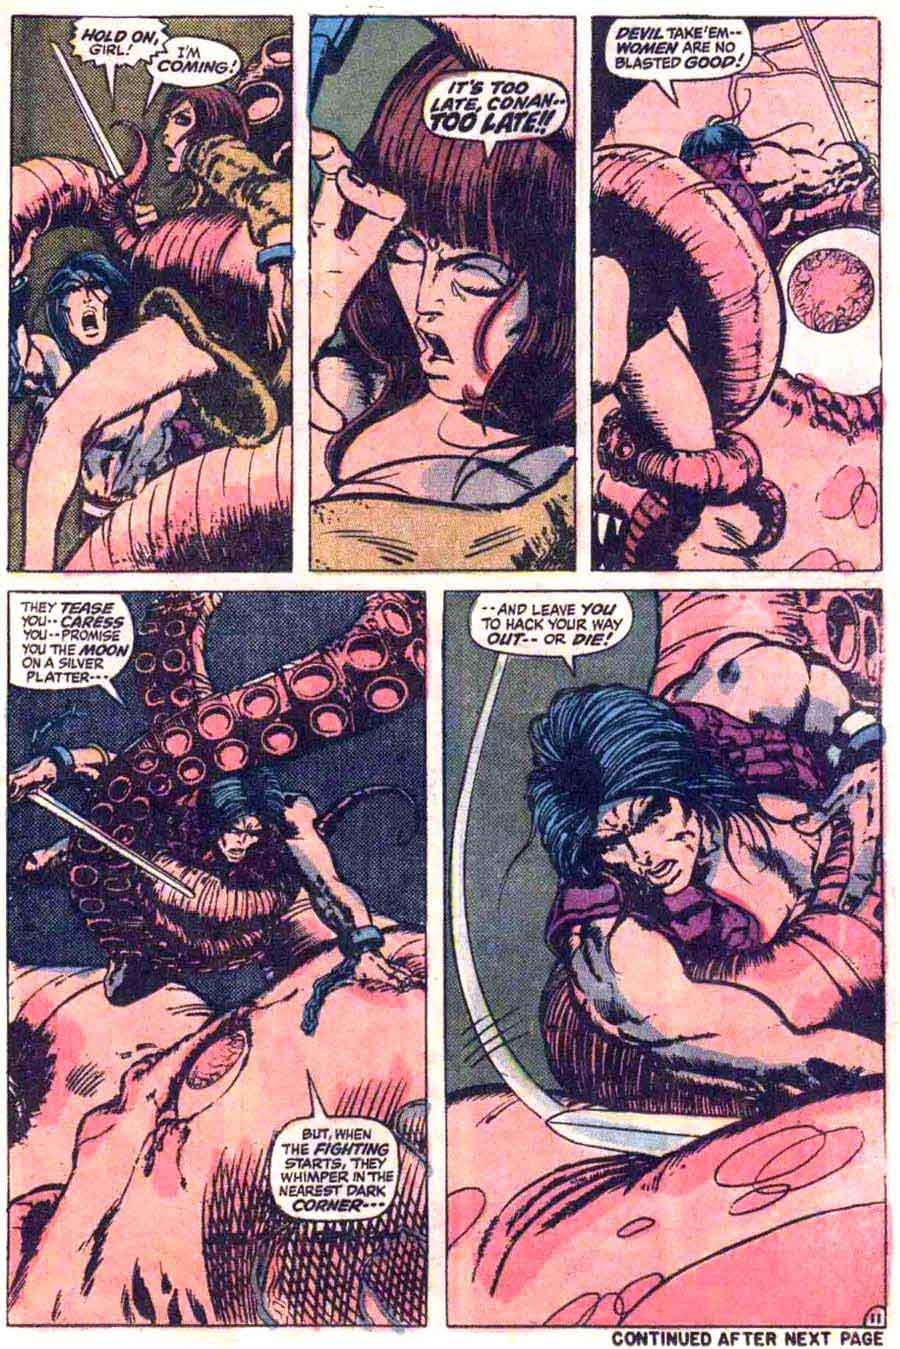 Conan the Barbarian v1 #12 marvel comic book page art by Barry Windsor Smith